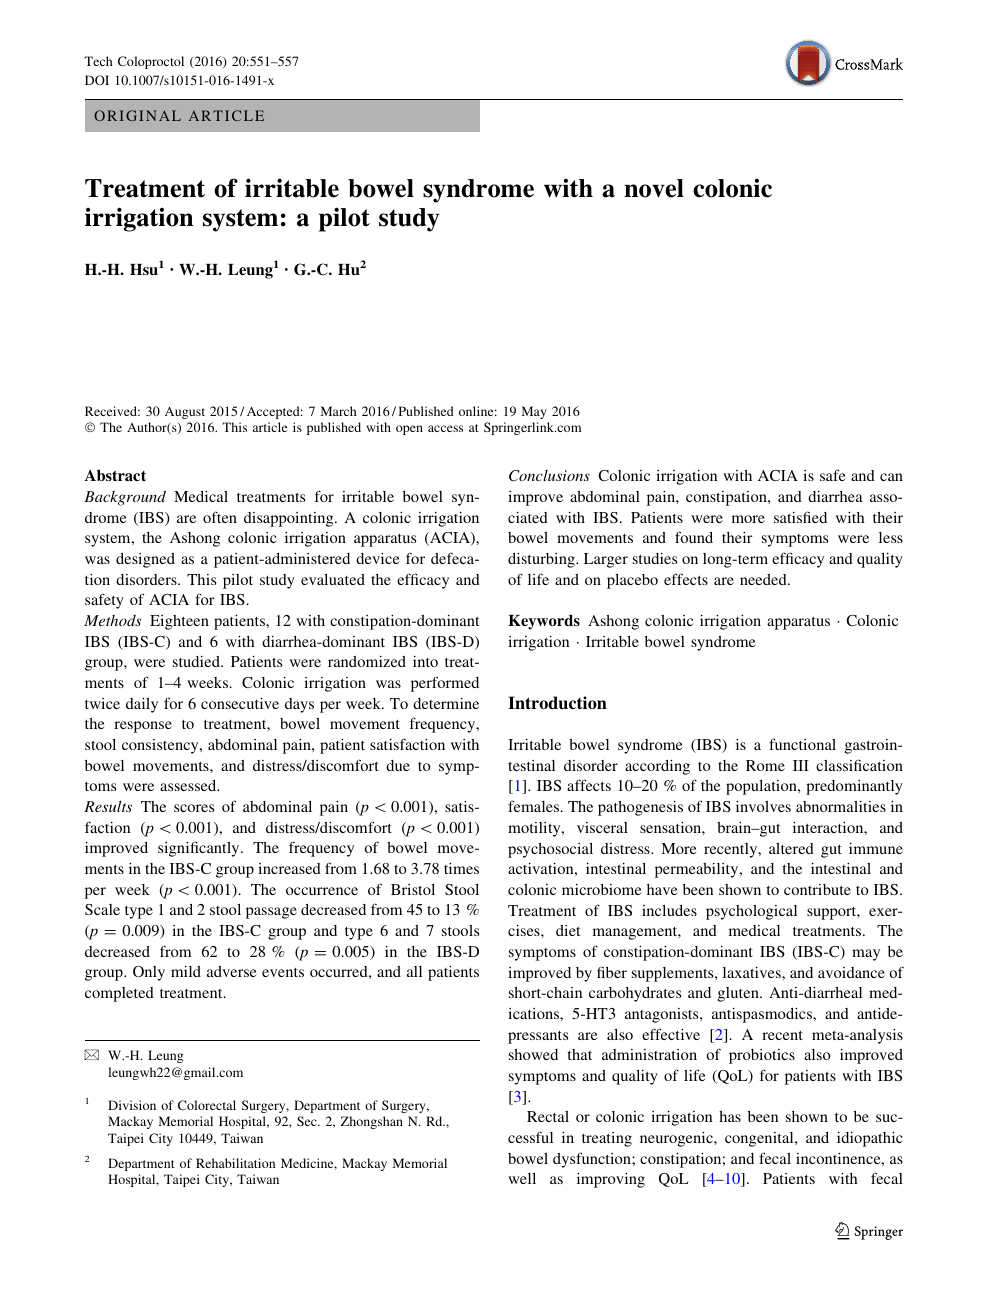 Treatment Of Irritable Bowel Syndrome With A Novel Colonic Irrigation System A Pilot Study Topic Of Research Paper In Clinical Medicine Download Scholarly Article Pdf And Read For Free On Cyberleninka